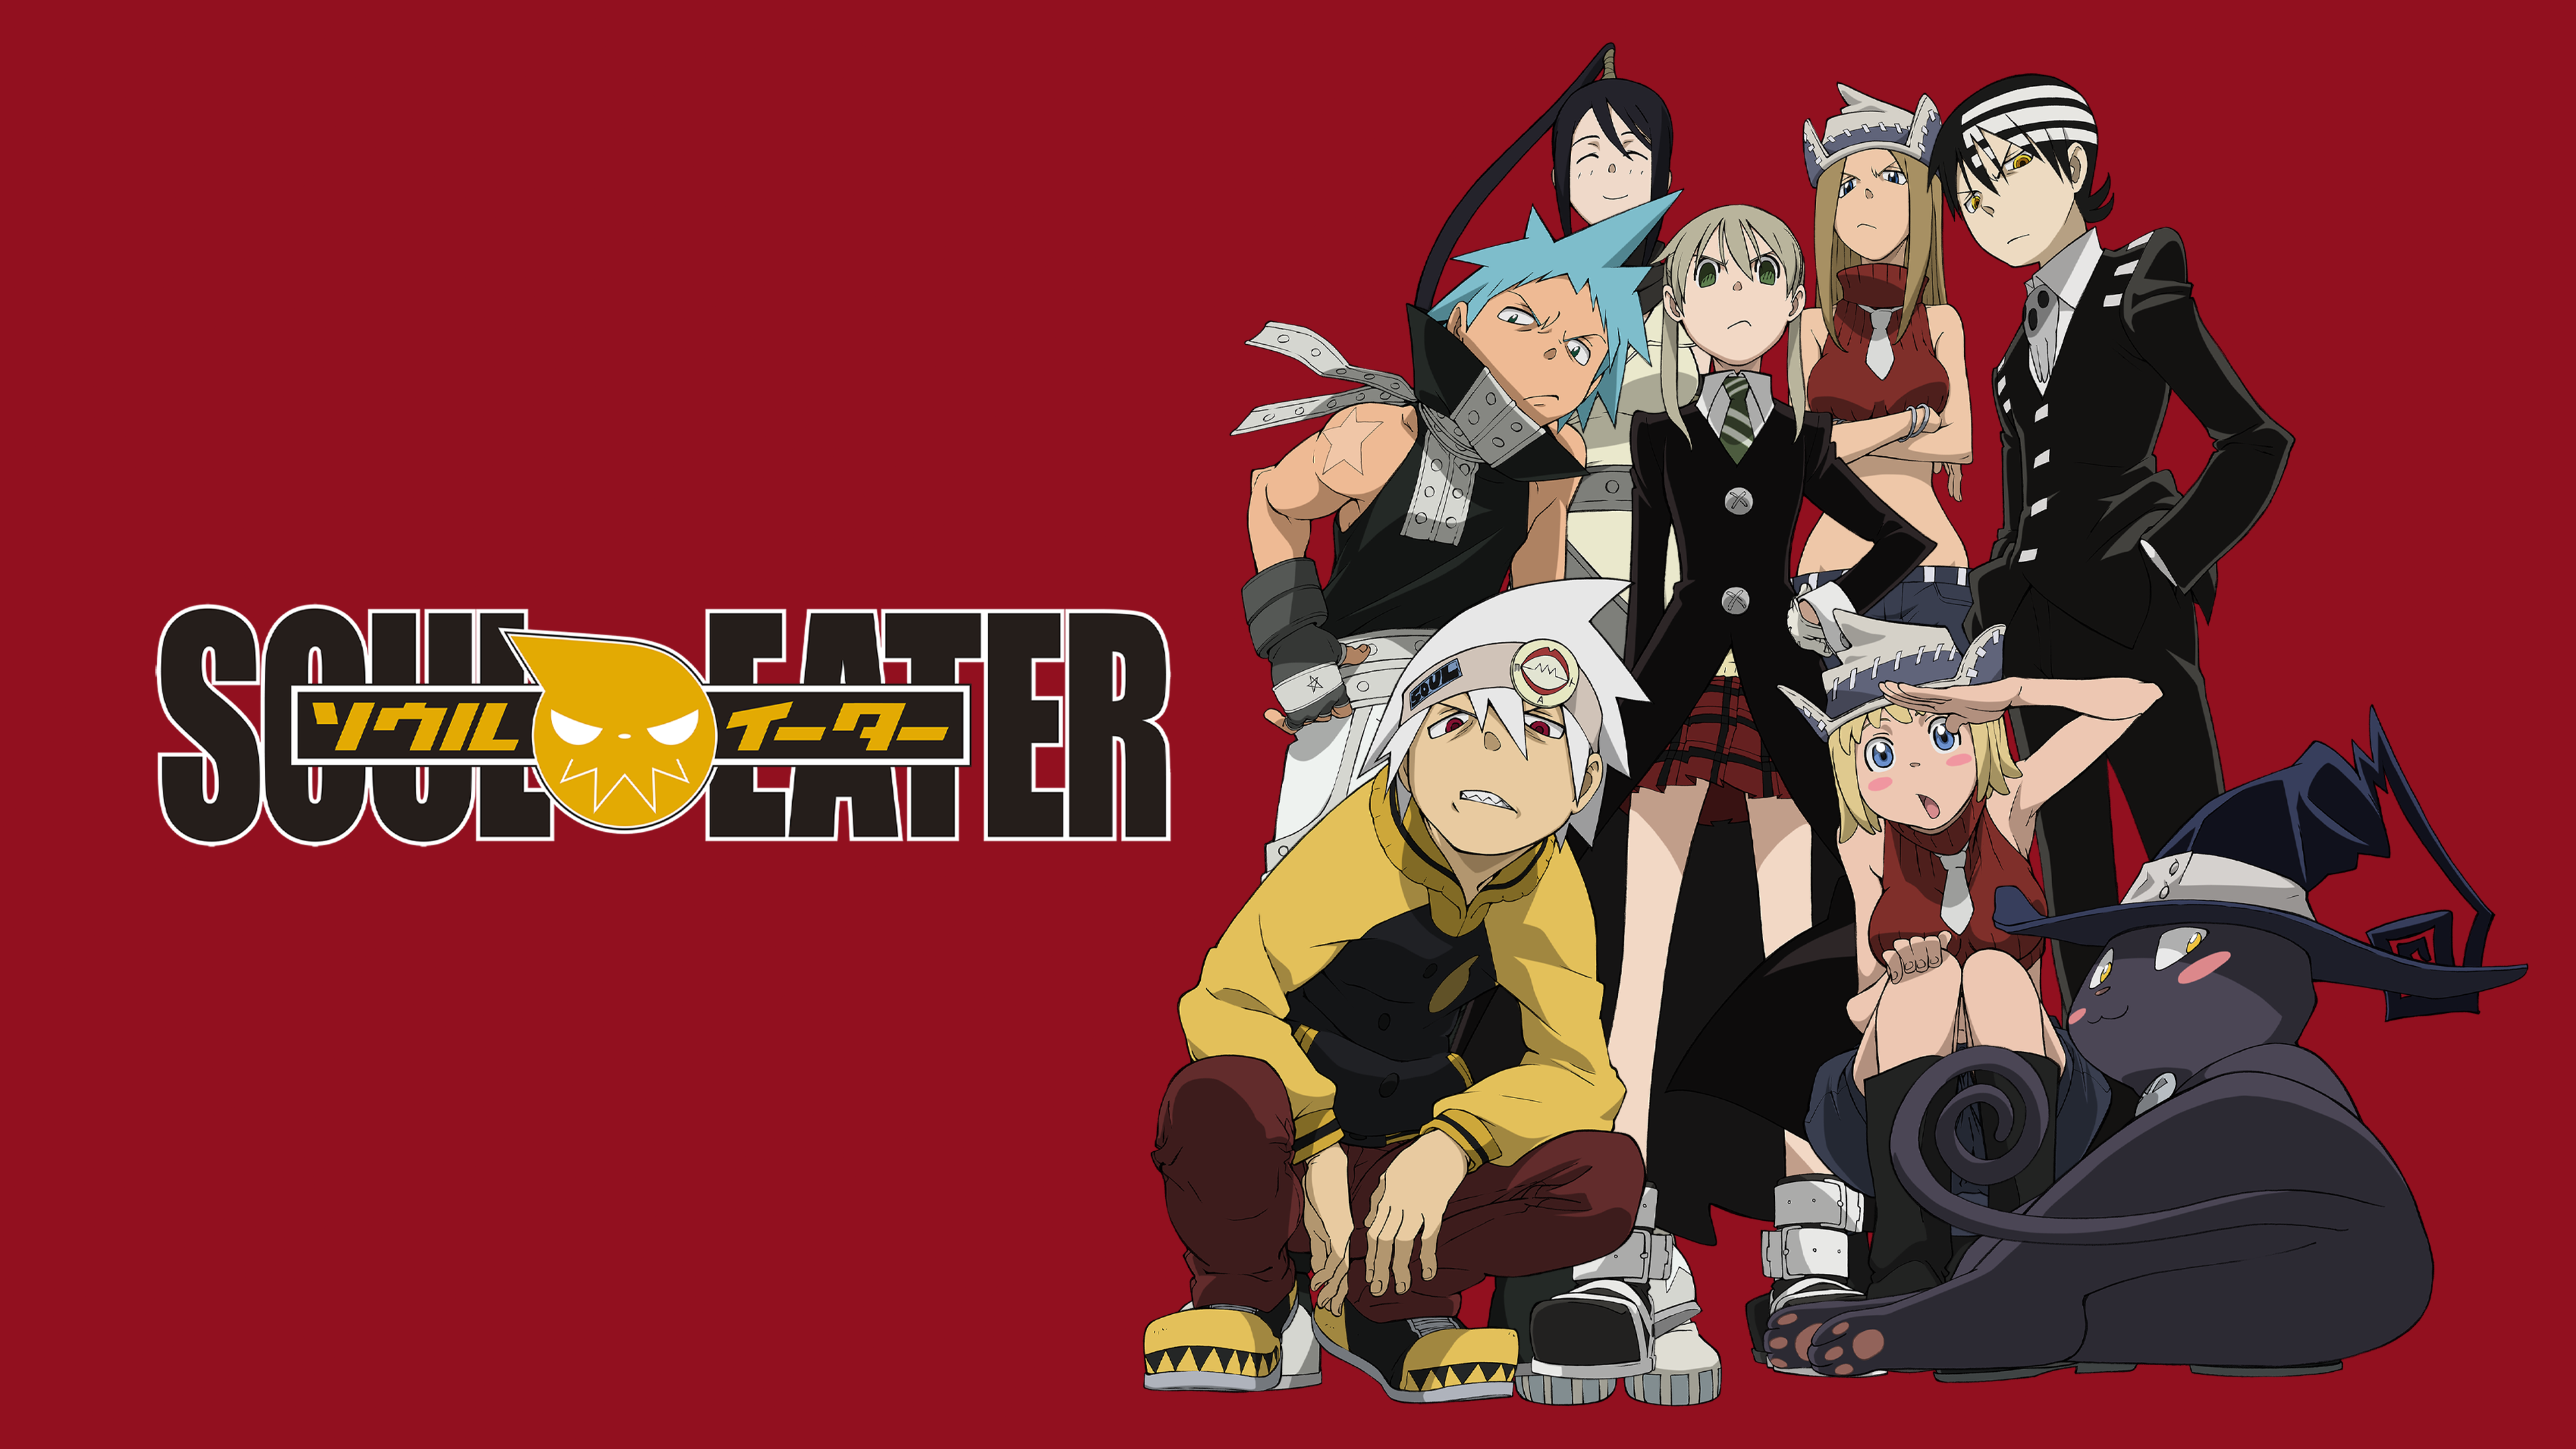 Watch Soul Eater Sub Dub Action Adventure Shounen Anime Funimation Choose an episode below and start watching soul eater in subbed & dubbed hd now. watch soul eater sub dub action